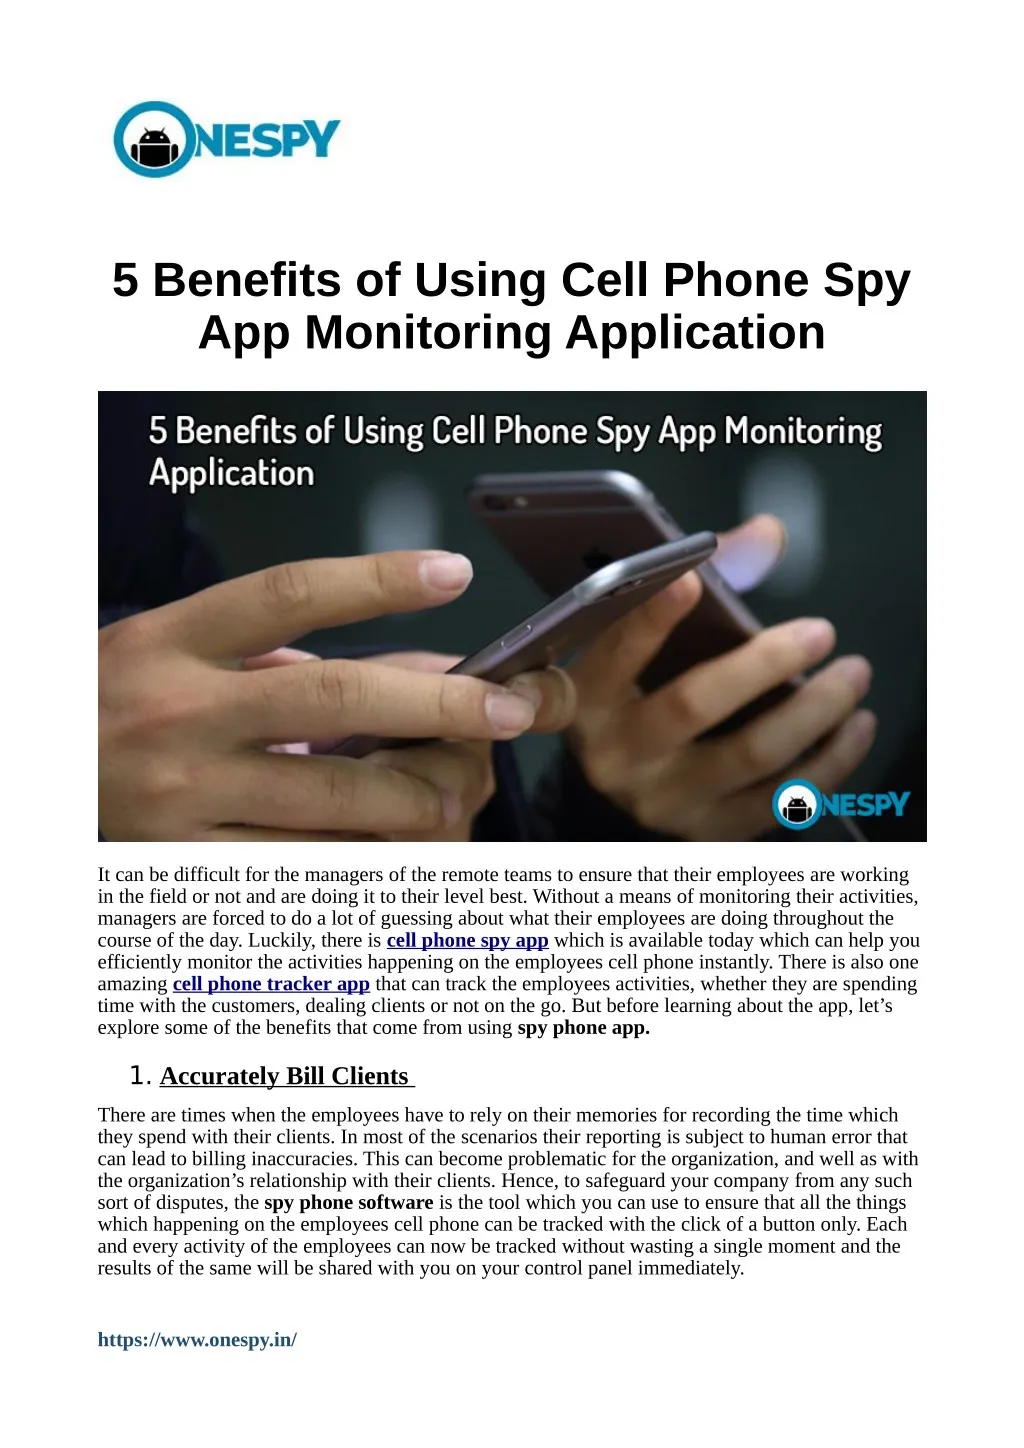 5 benefits of using cell phone spy app monitoring